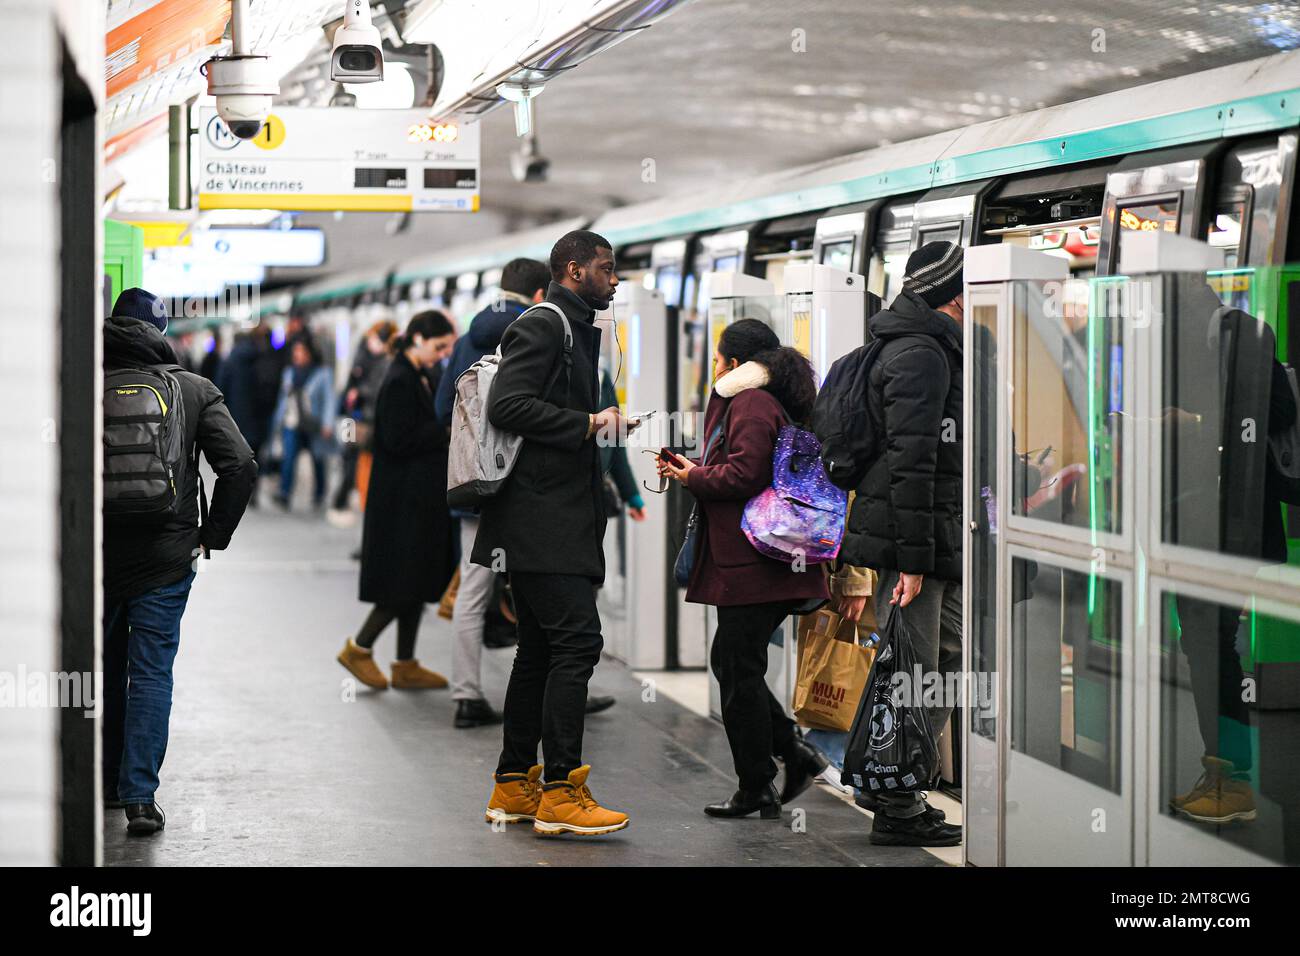 Illustration picture shows the platform of a Parisian subway station (RATP metro or metropolitain), with people (passengers) in Paris, France on January 31, 2023. Trade unions have called for a strike and further demonstrations to protest against the pension reform bill. Photo by Victor Joly/ABACAPRESS.COM Stock Photo